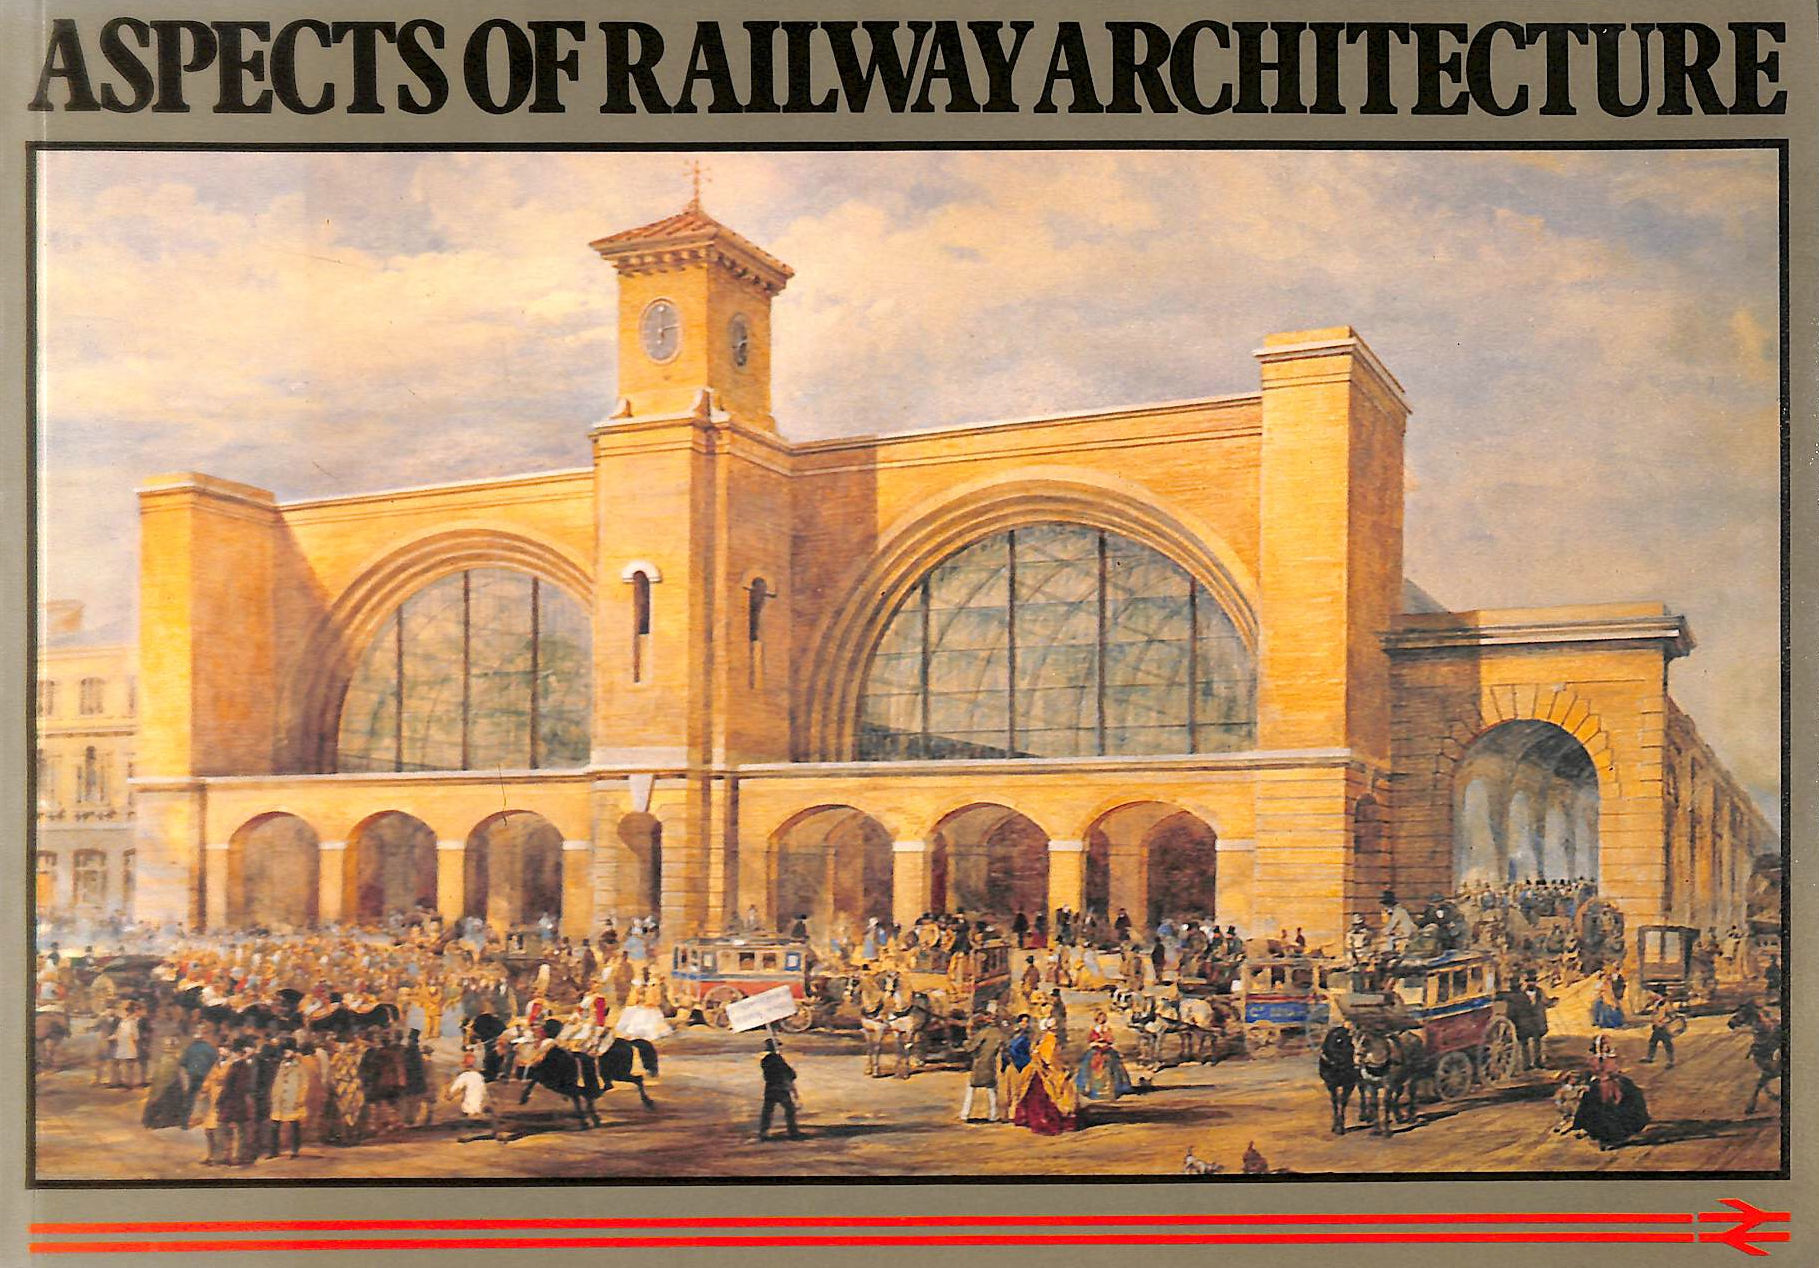 CLARKE, LINDA & OTHERS - Aspects of Railway Architecture